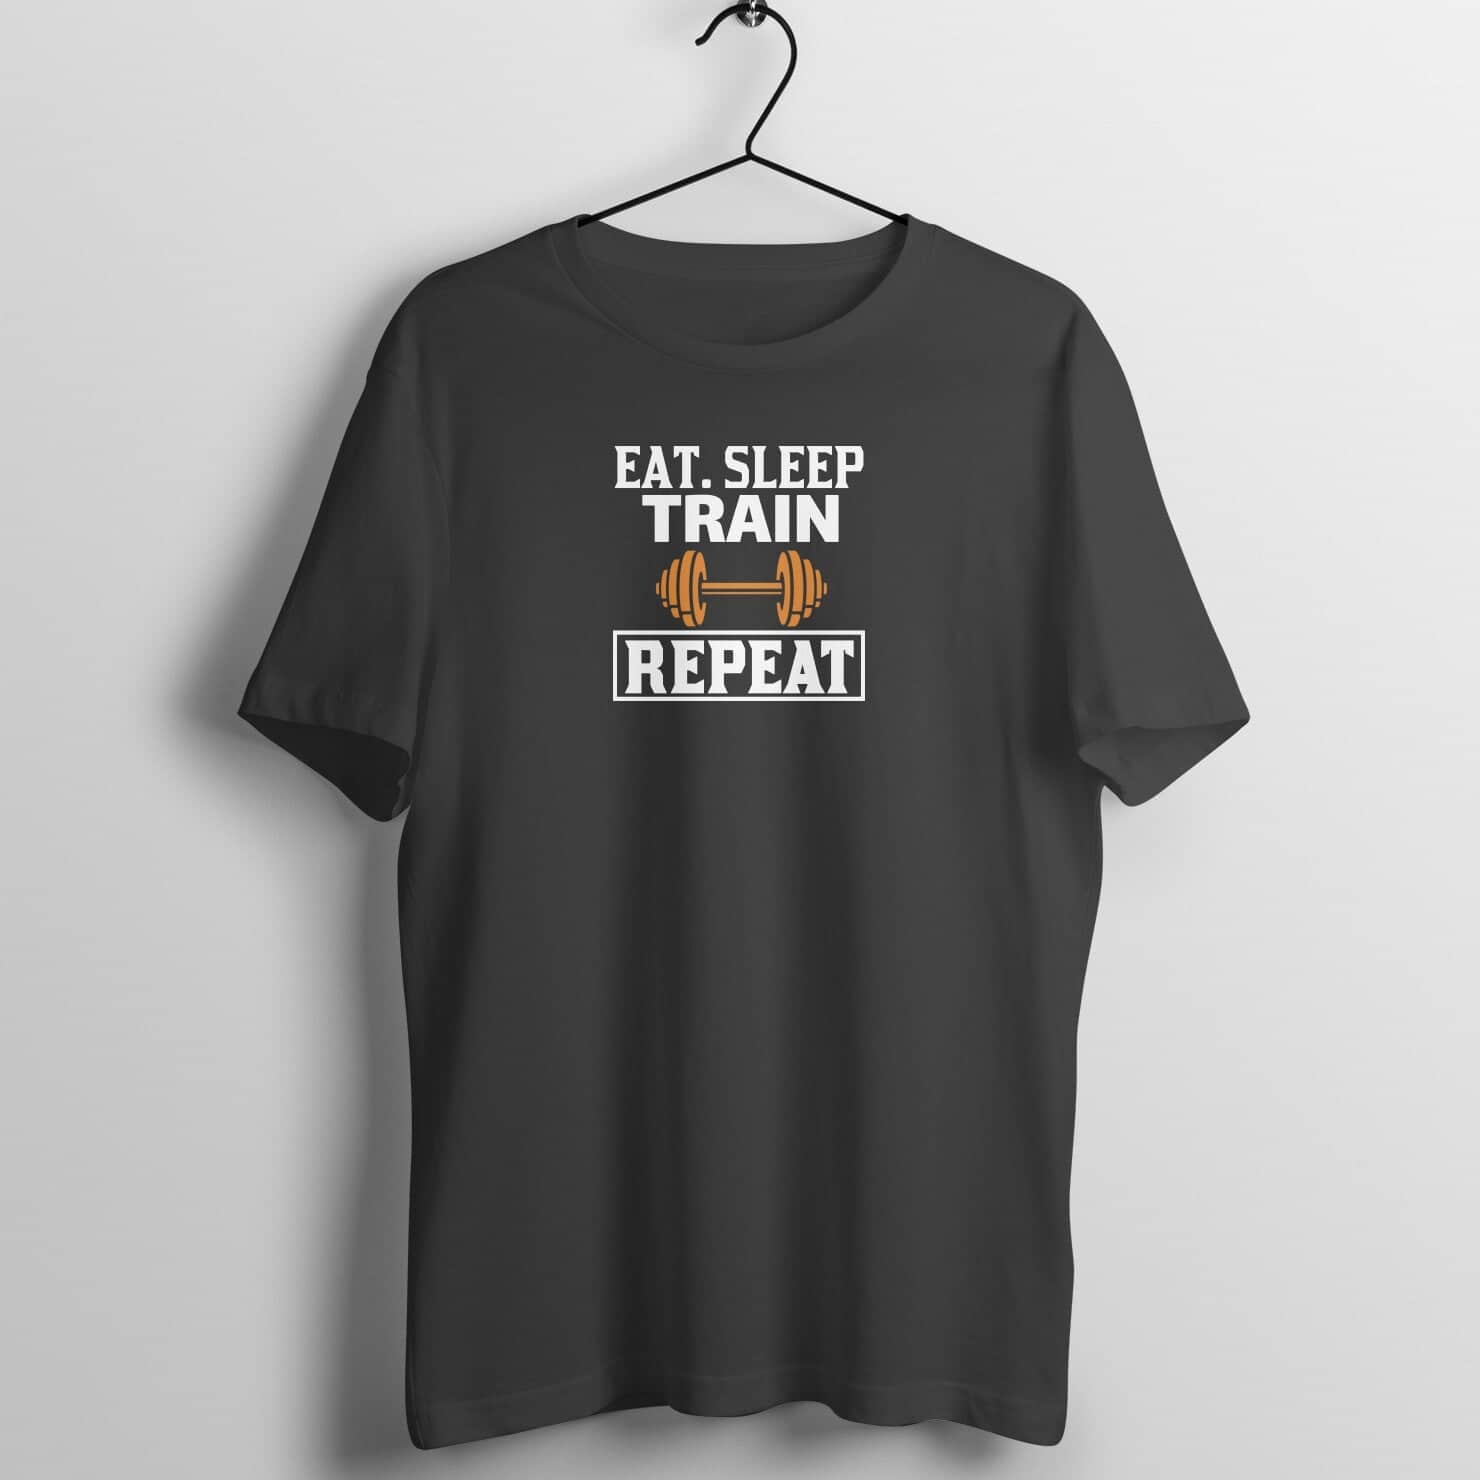 Eat sleep Train Repeat Exclusive Black T Shirt for Fitness Freaks Men and Women Printrove Black S 